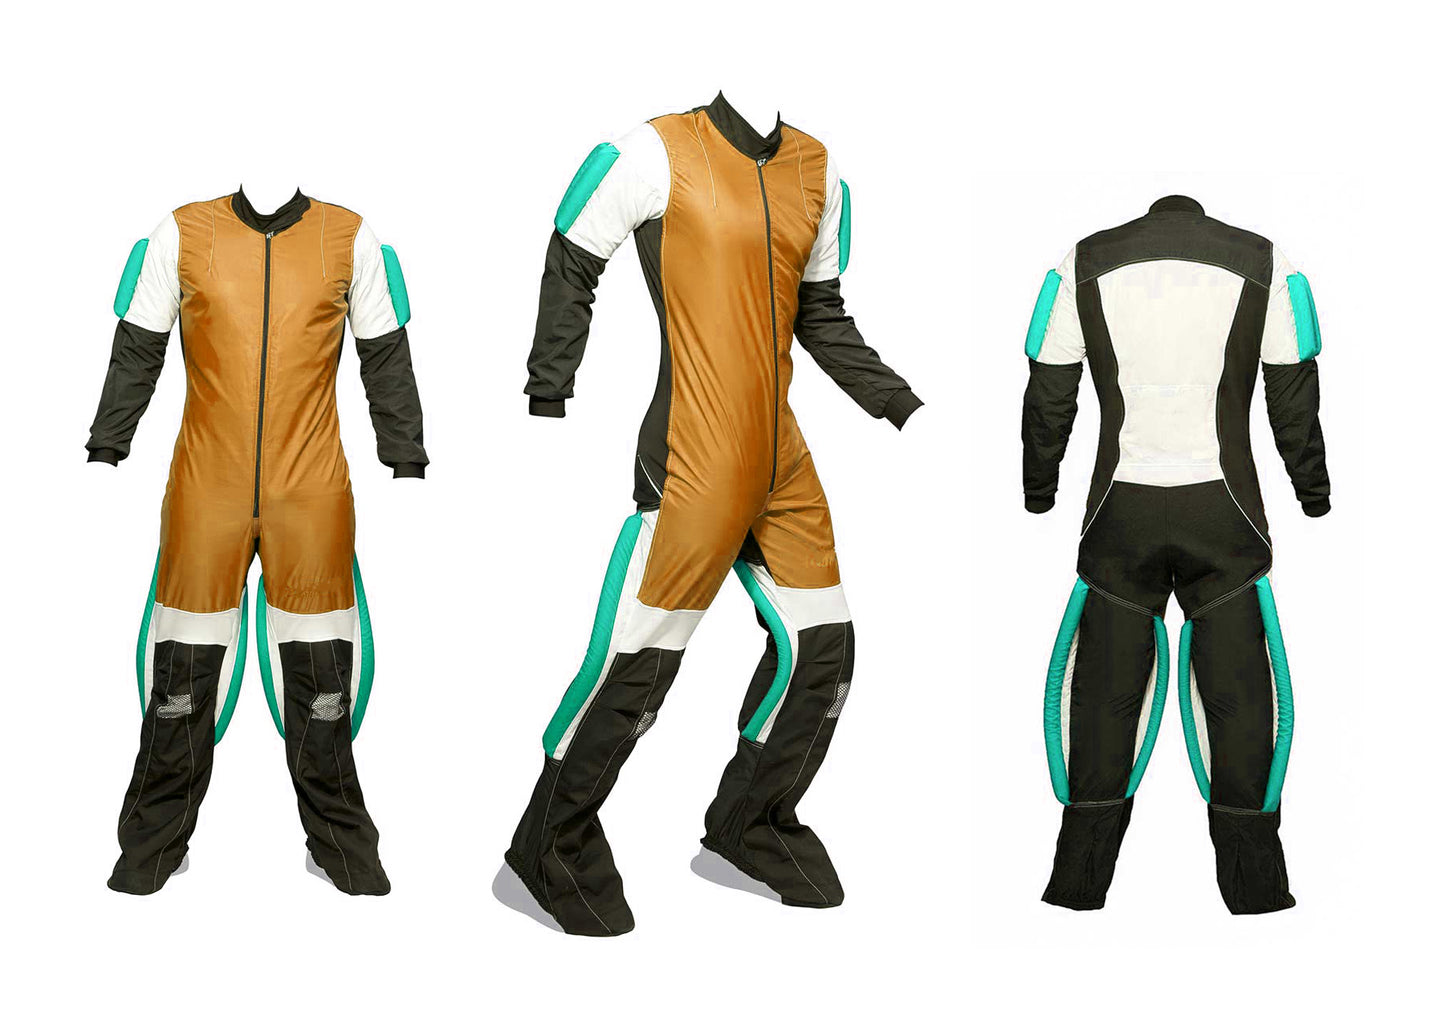 Skydiving Formation Suit RW-044